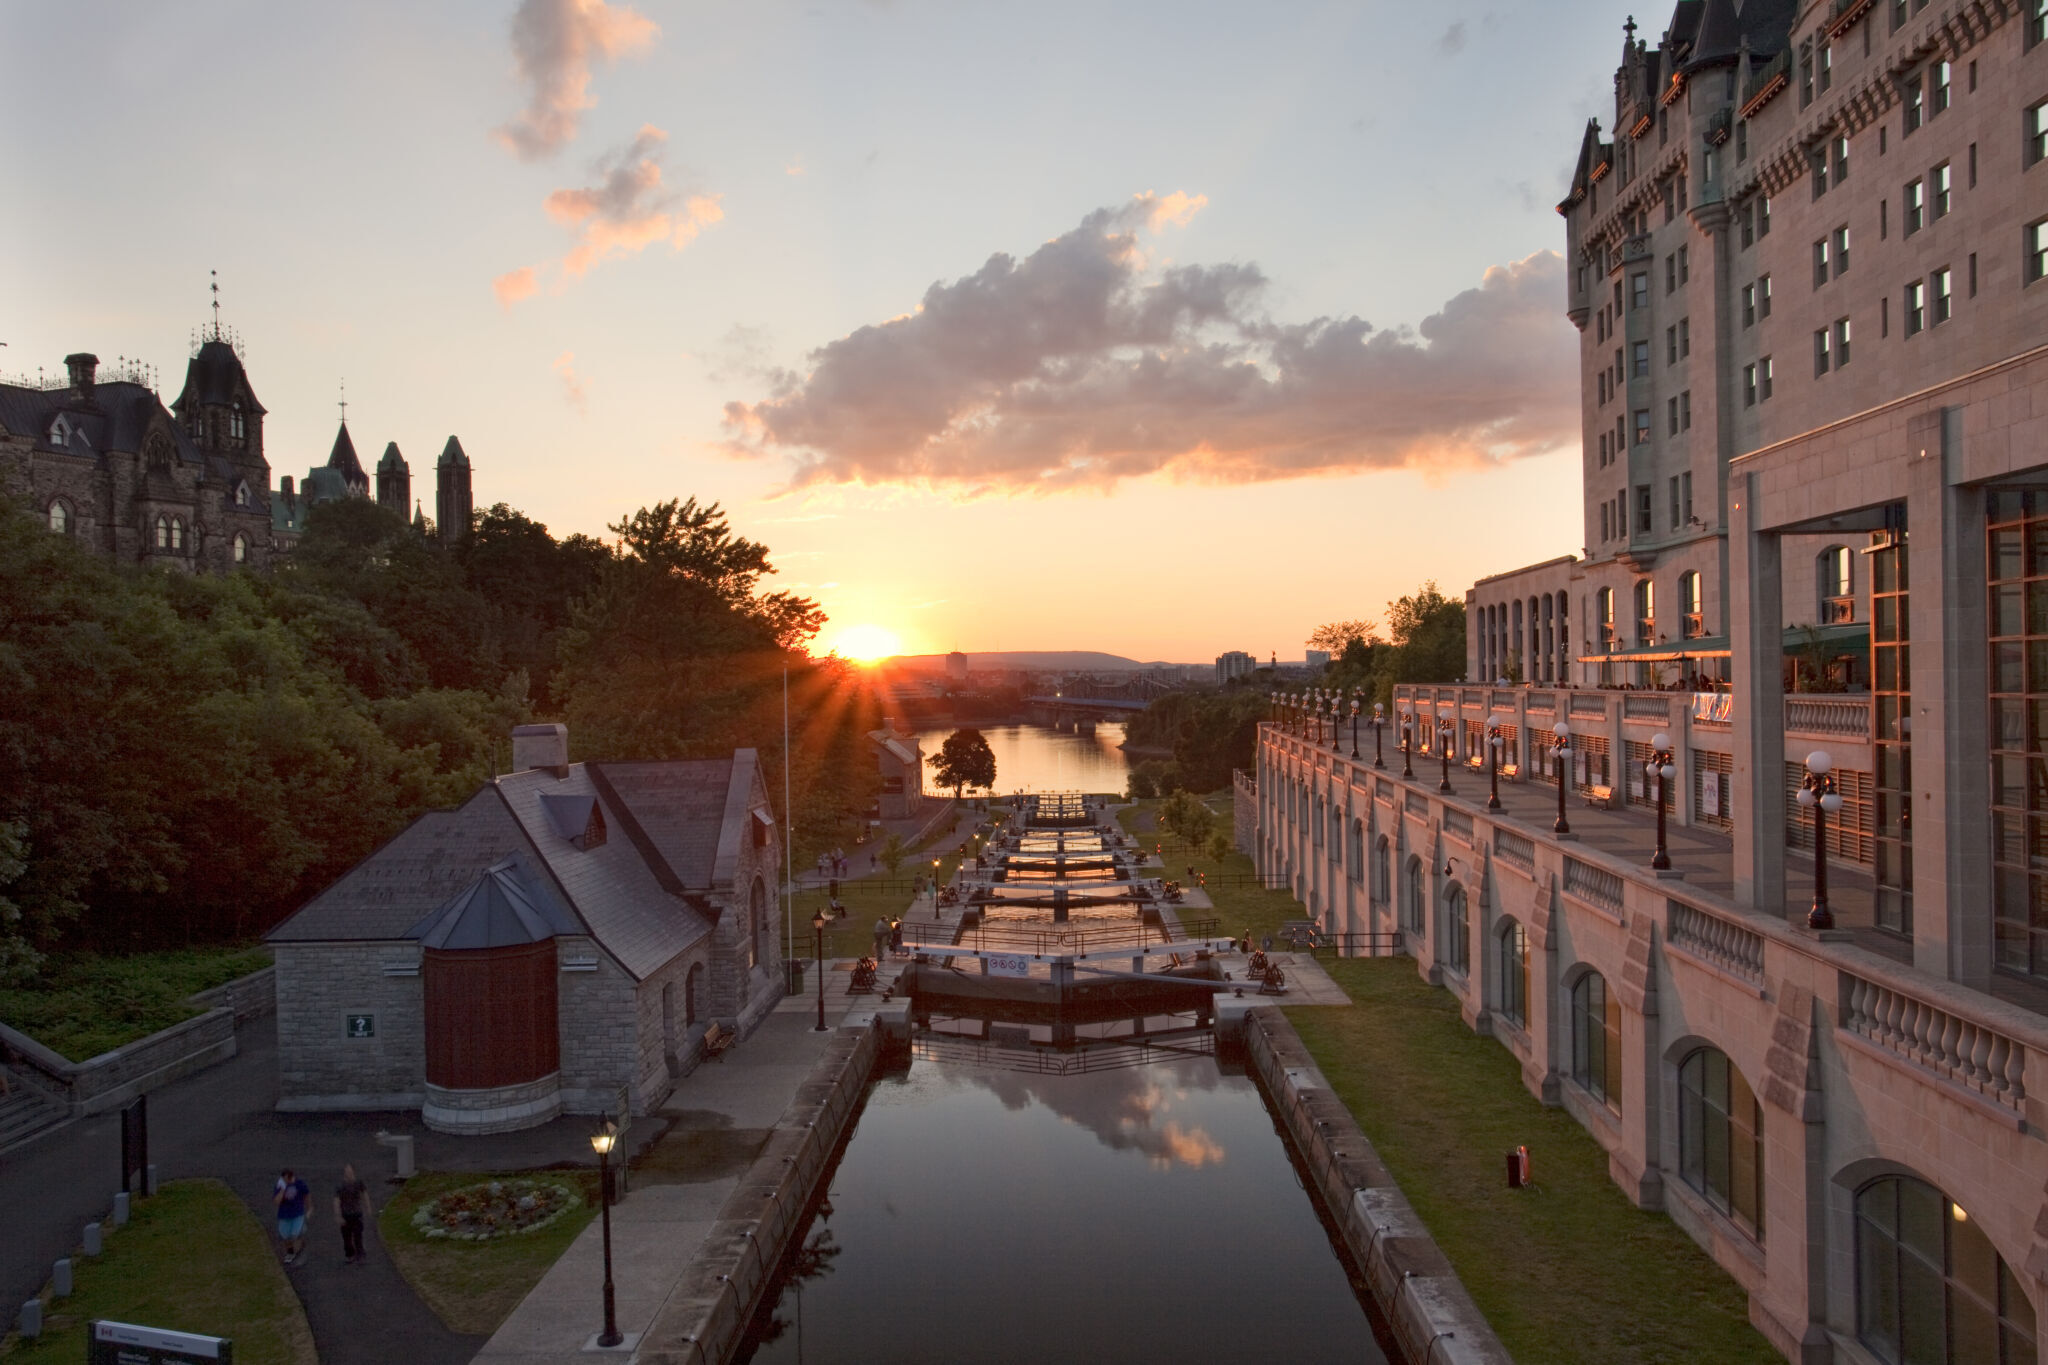 Sunny evening view of the Rideau Canal locks.